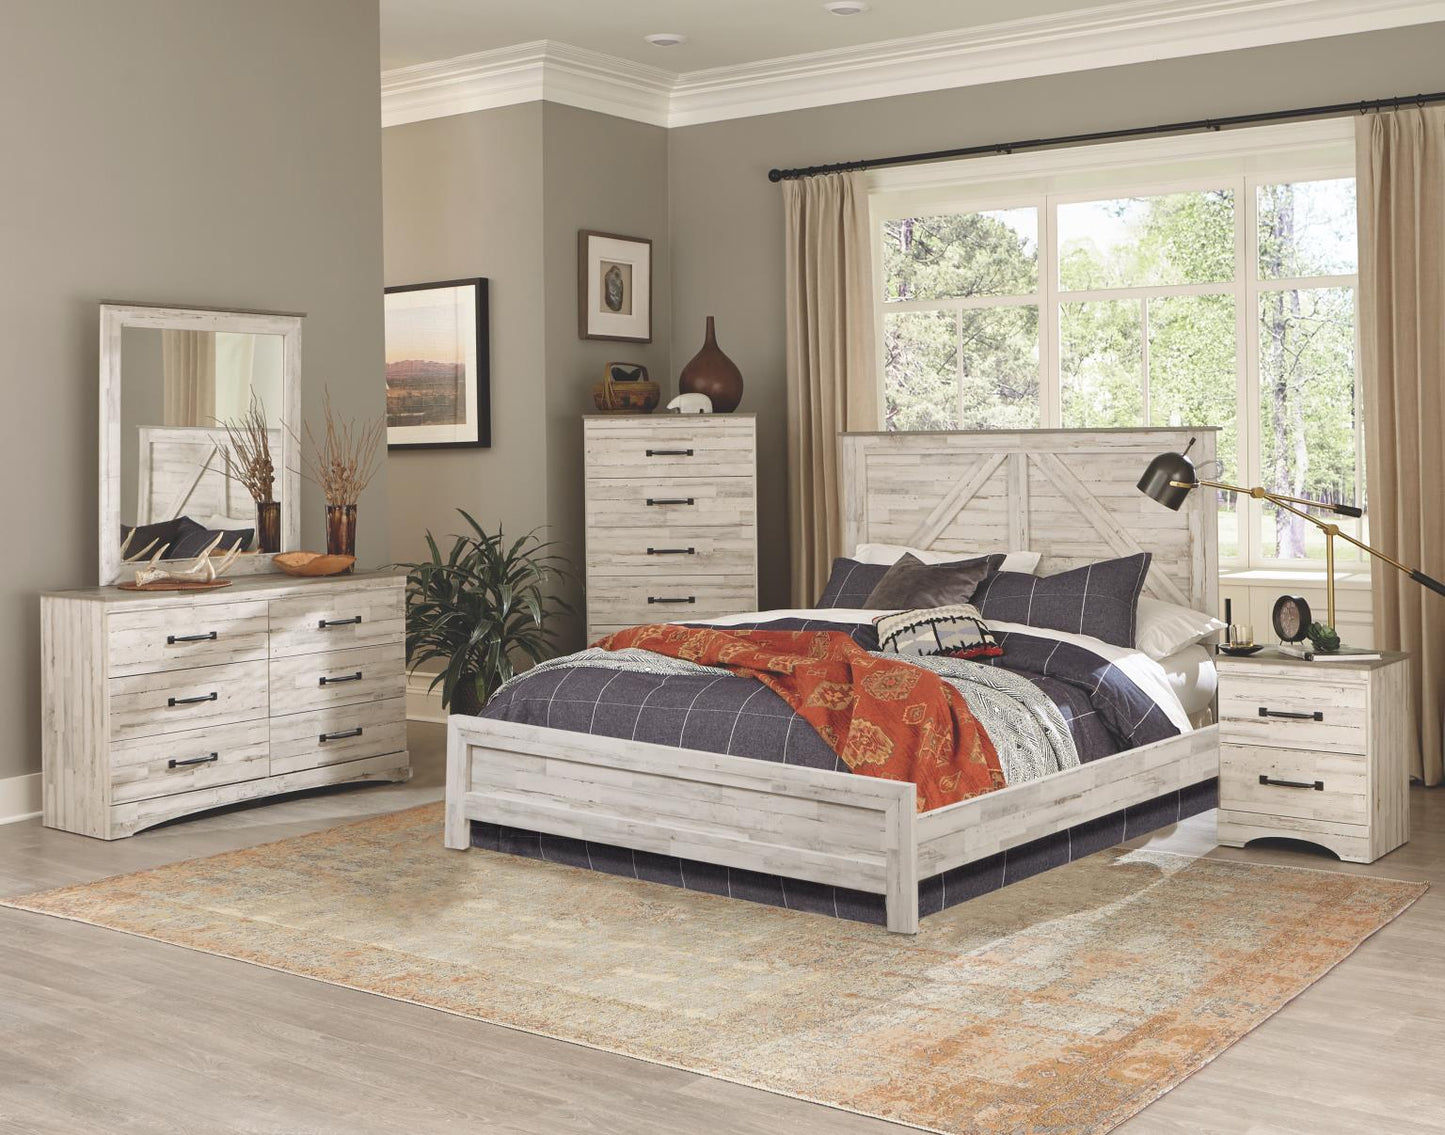 Gorgeous Pre-assembled 5 piece bedroom set thats proudly made in America